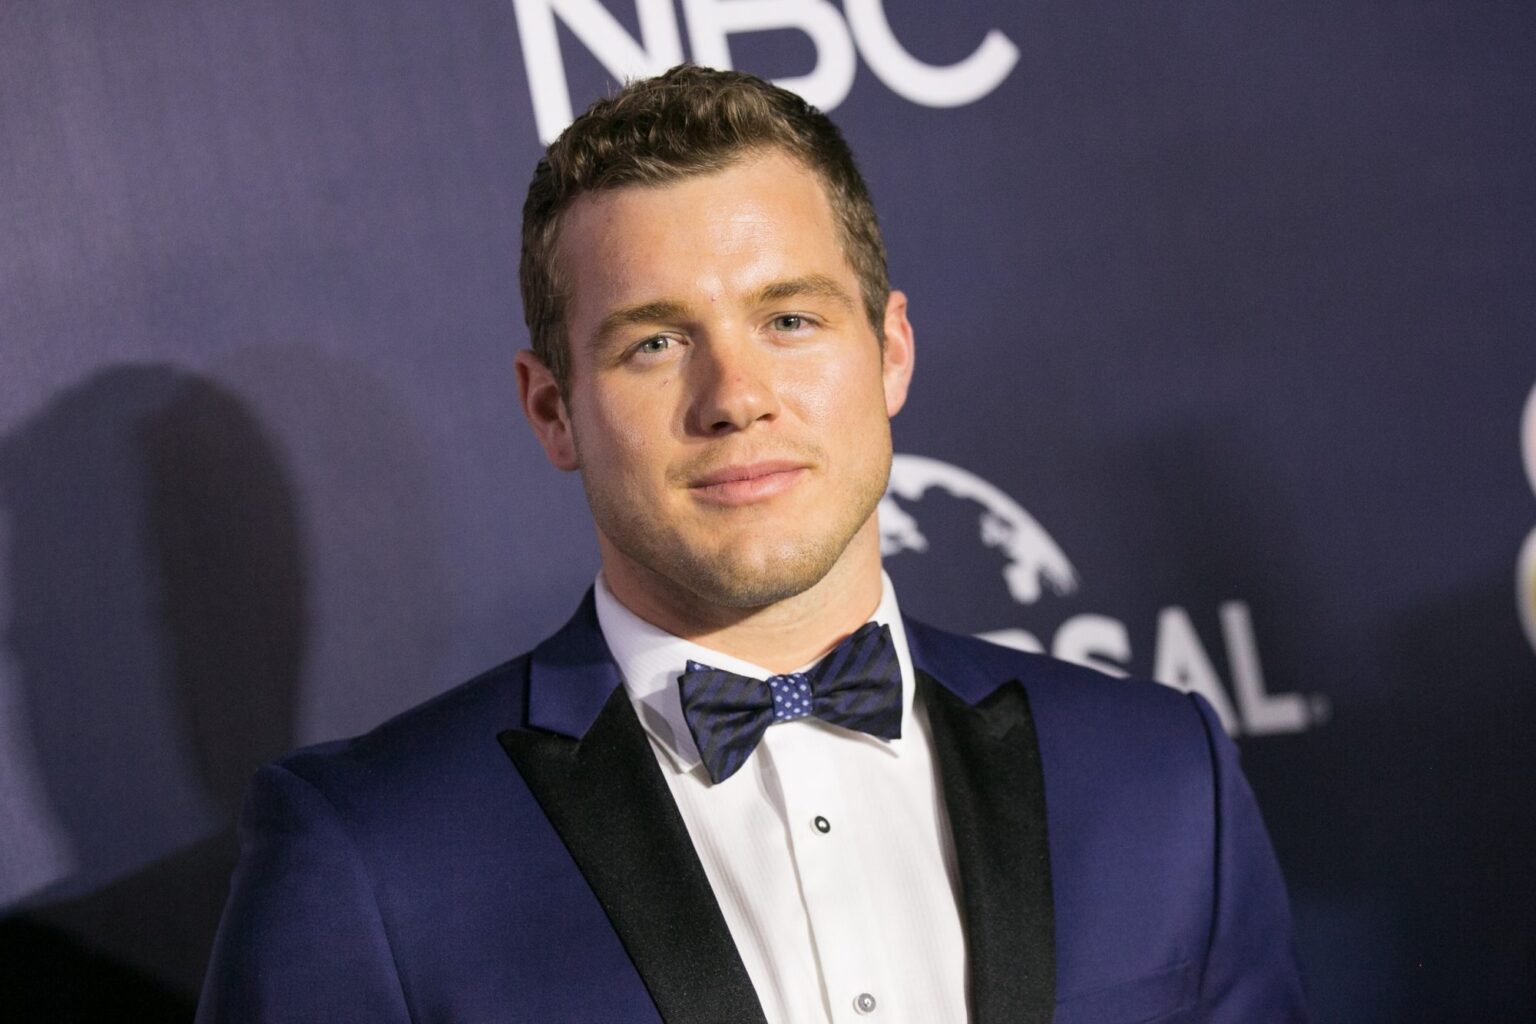 Former star of ABC's The Bachelor has officially come out as gay. Learn about Colton Underwood's journey that put all of Bachelor Nation on watch.